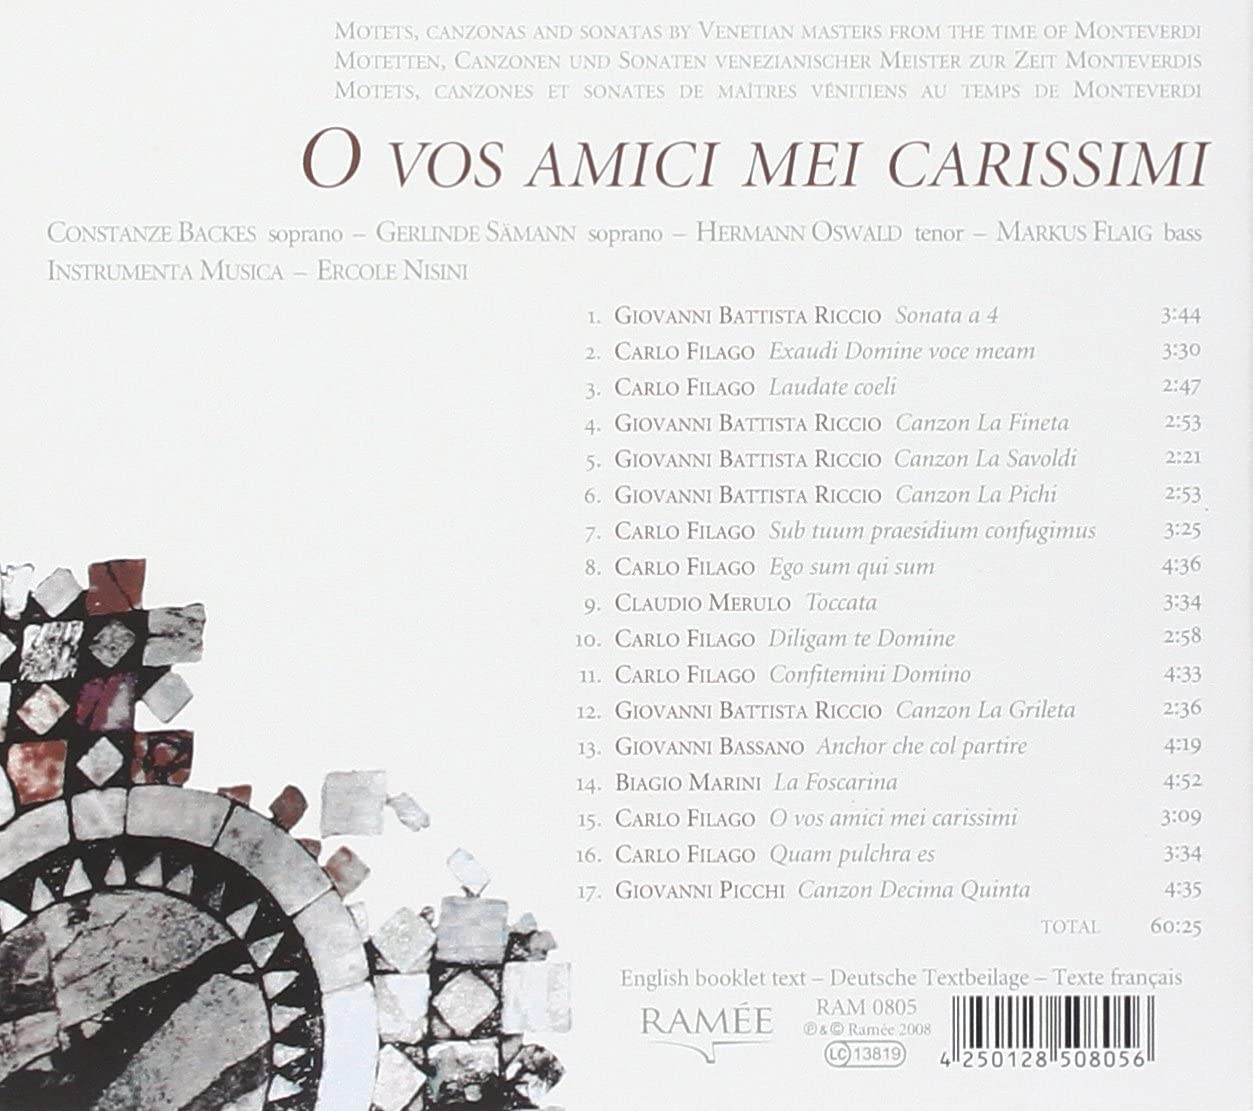 O Vos Amici Mei Carissimi - Motets Canzonas and Sonatas by Venetian Masters - slide-1